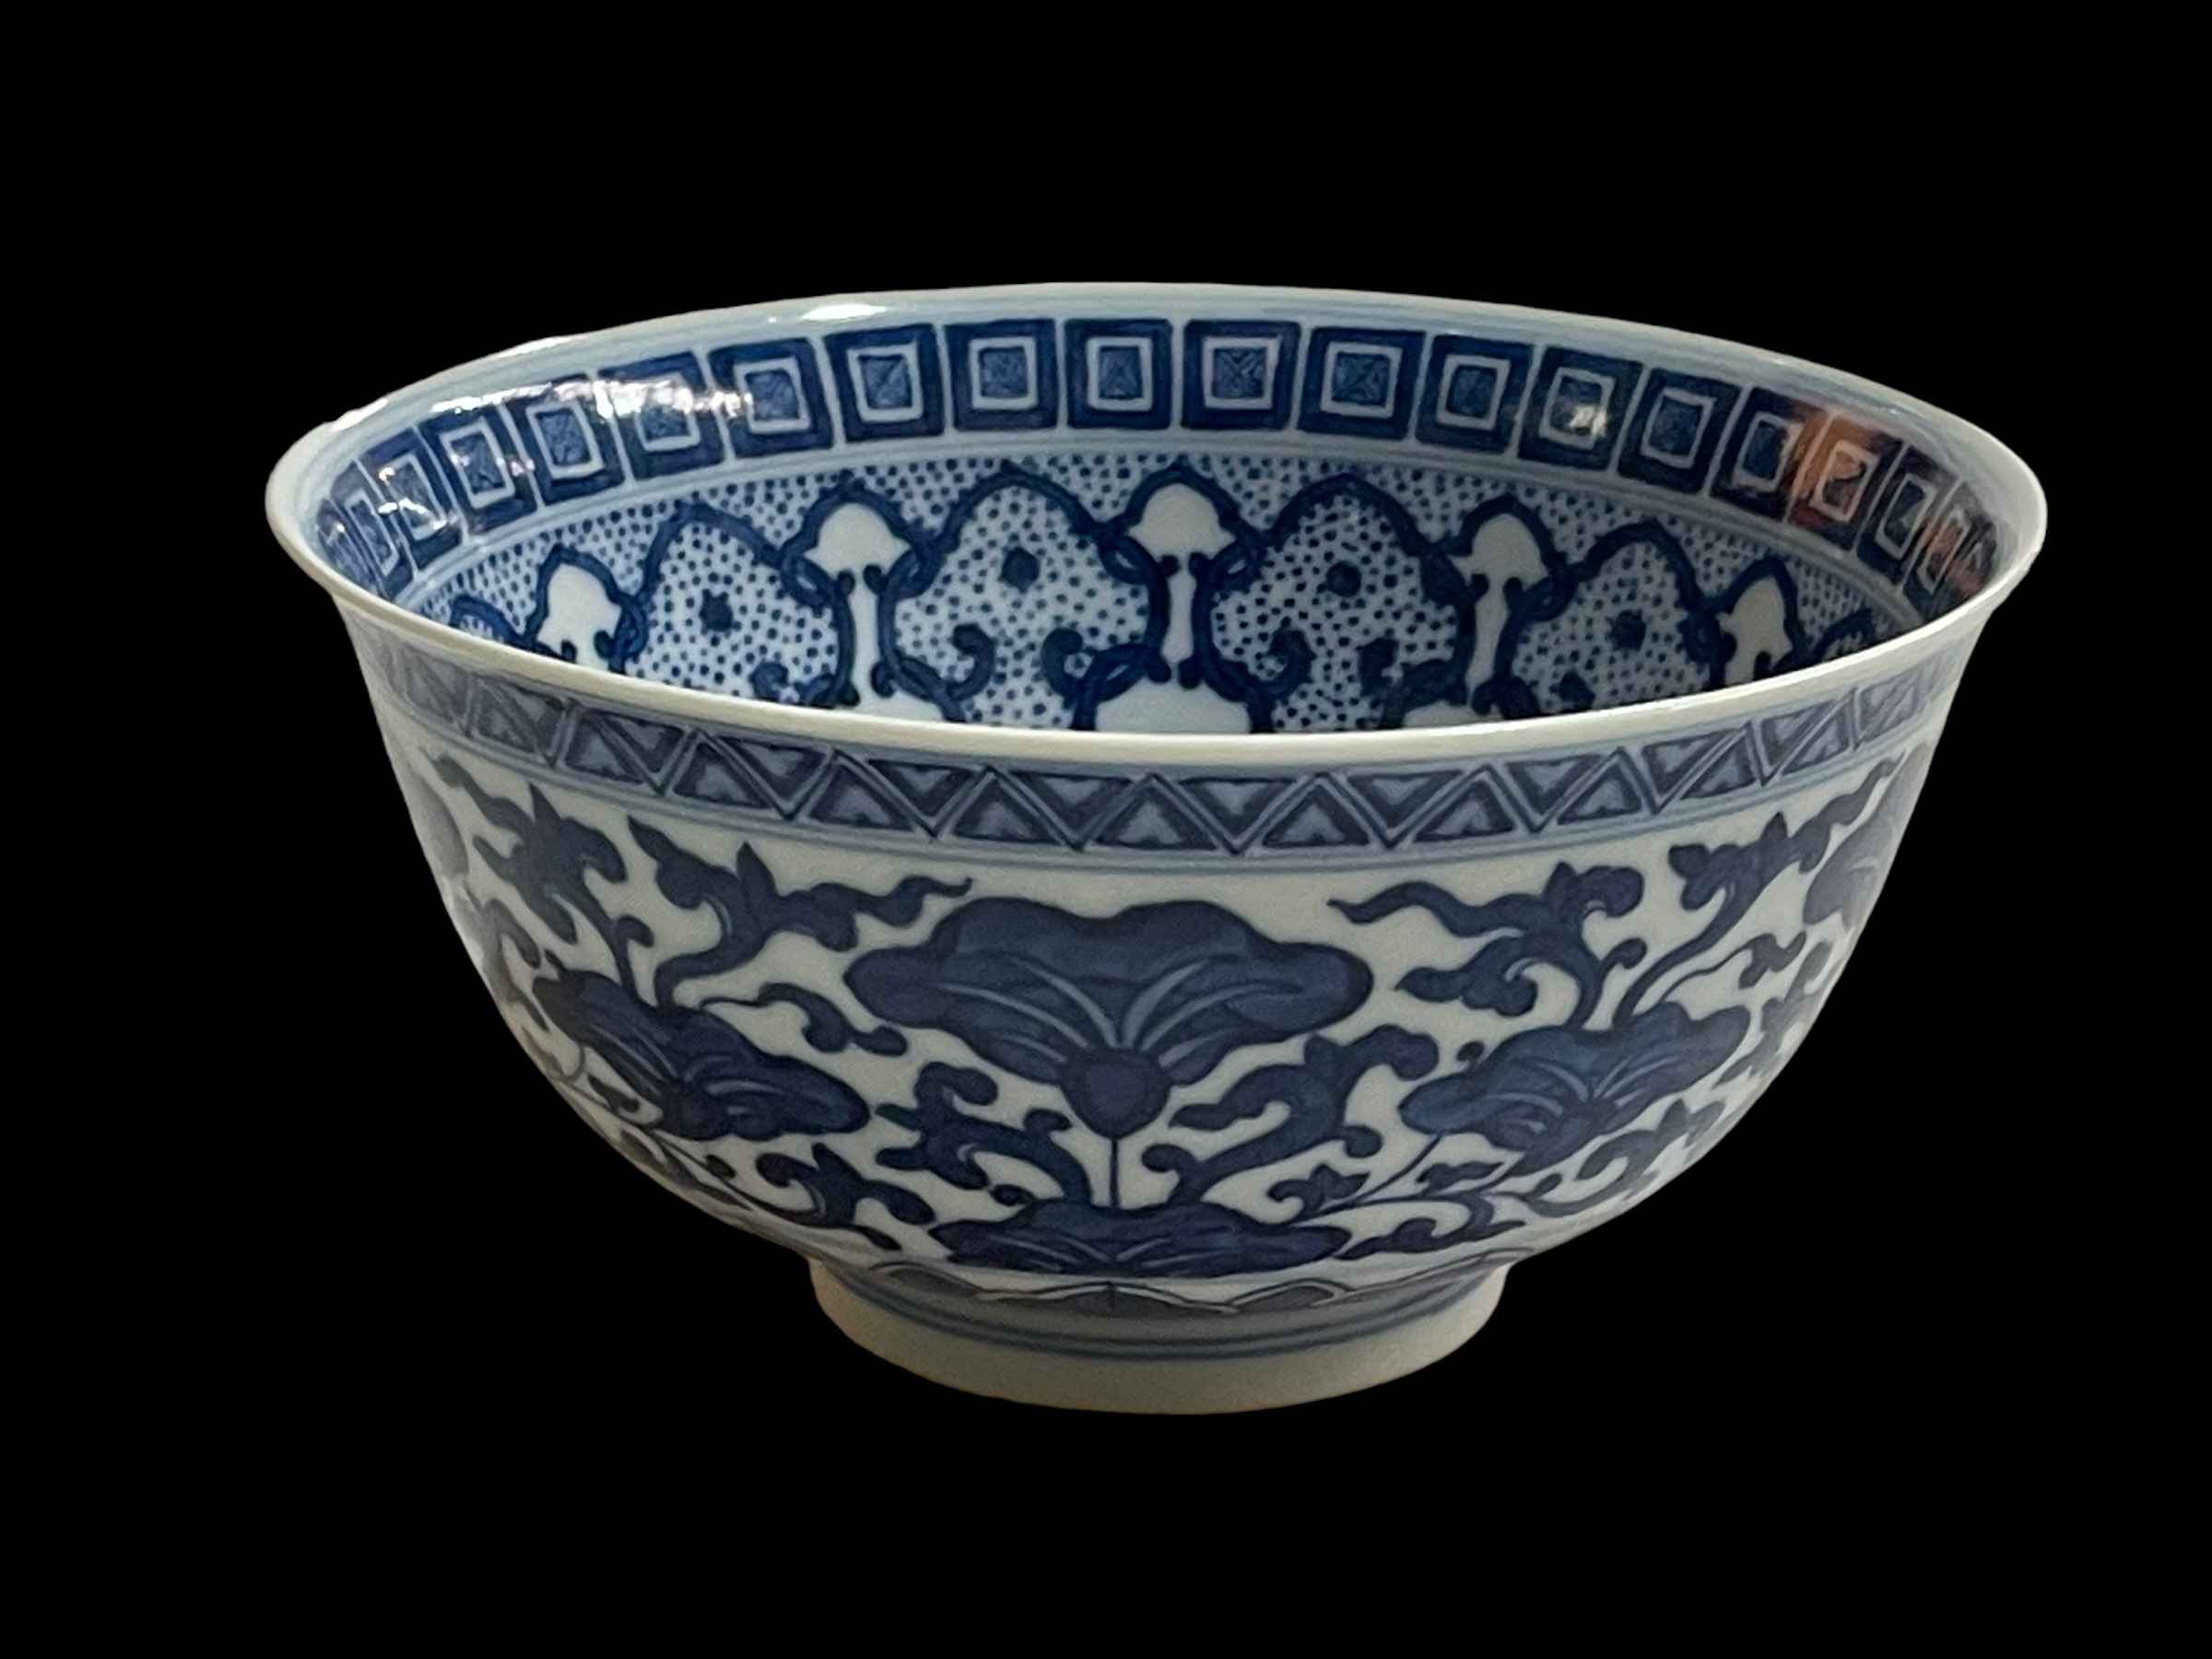 Chinese blue and white bowl with stylised design decoration, 13.5cm diameter.